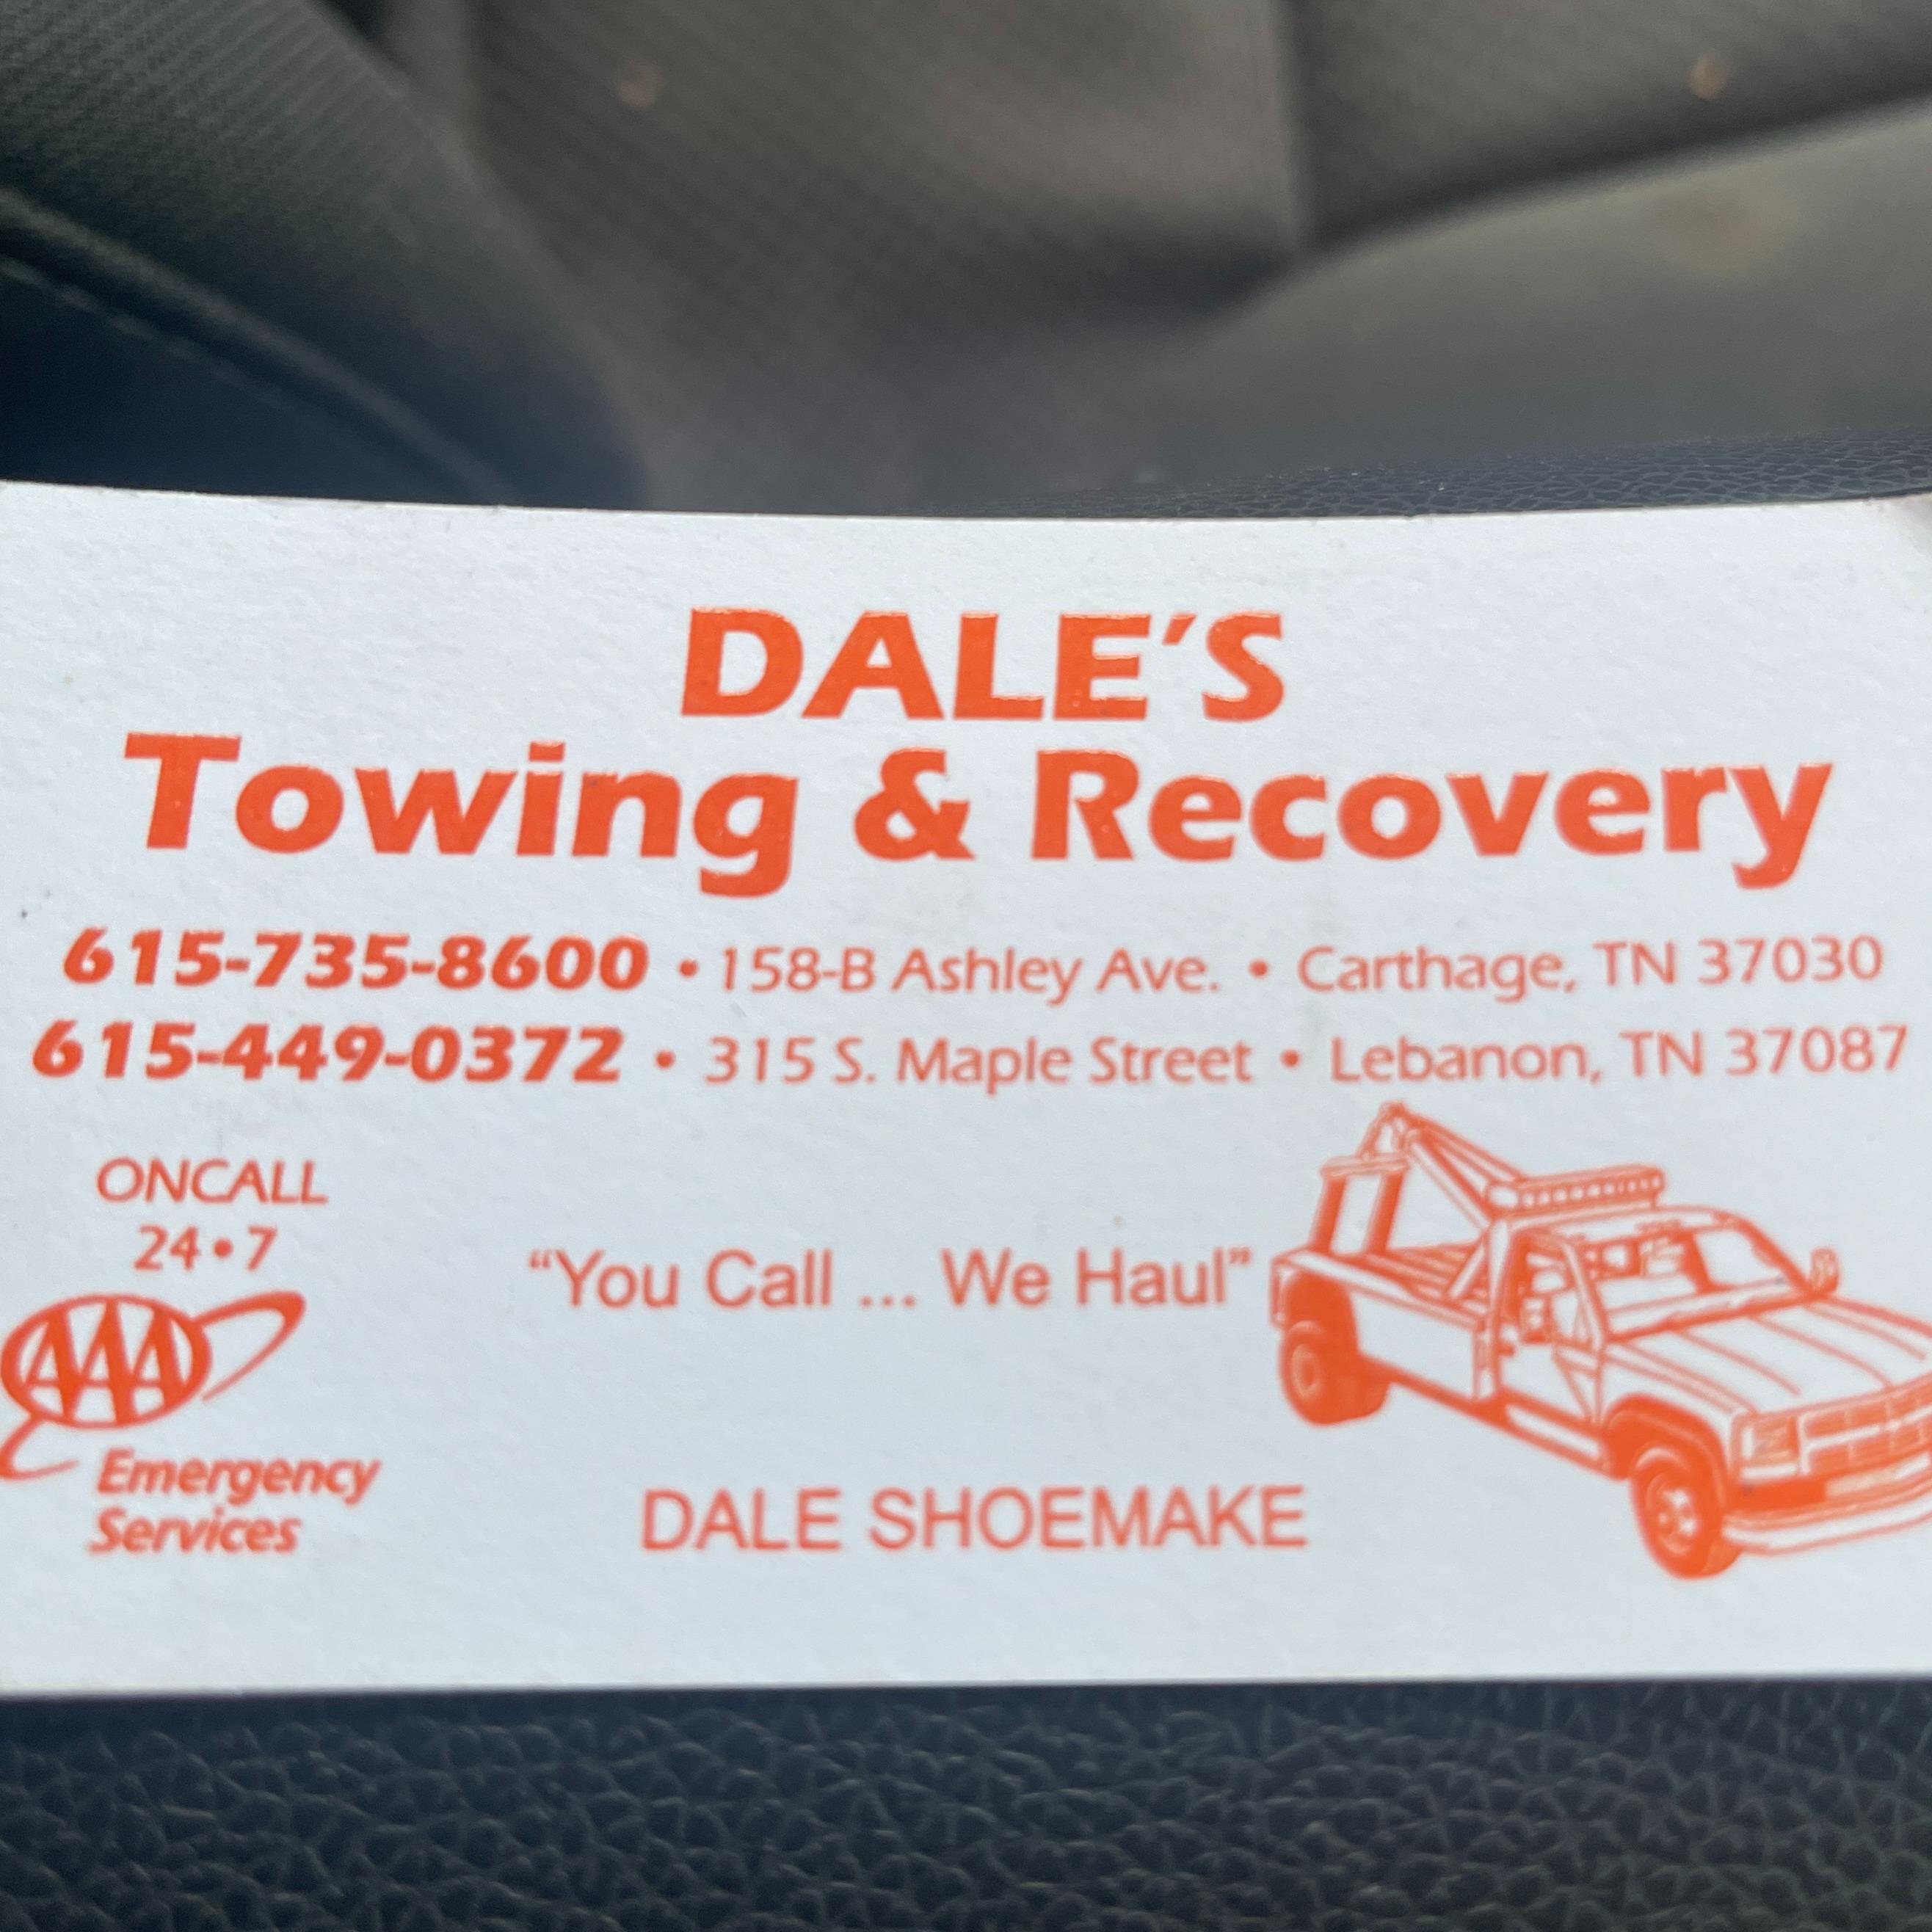 Dale's Towing and Recovery